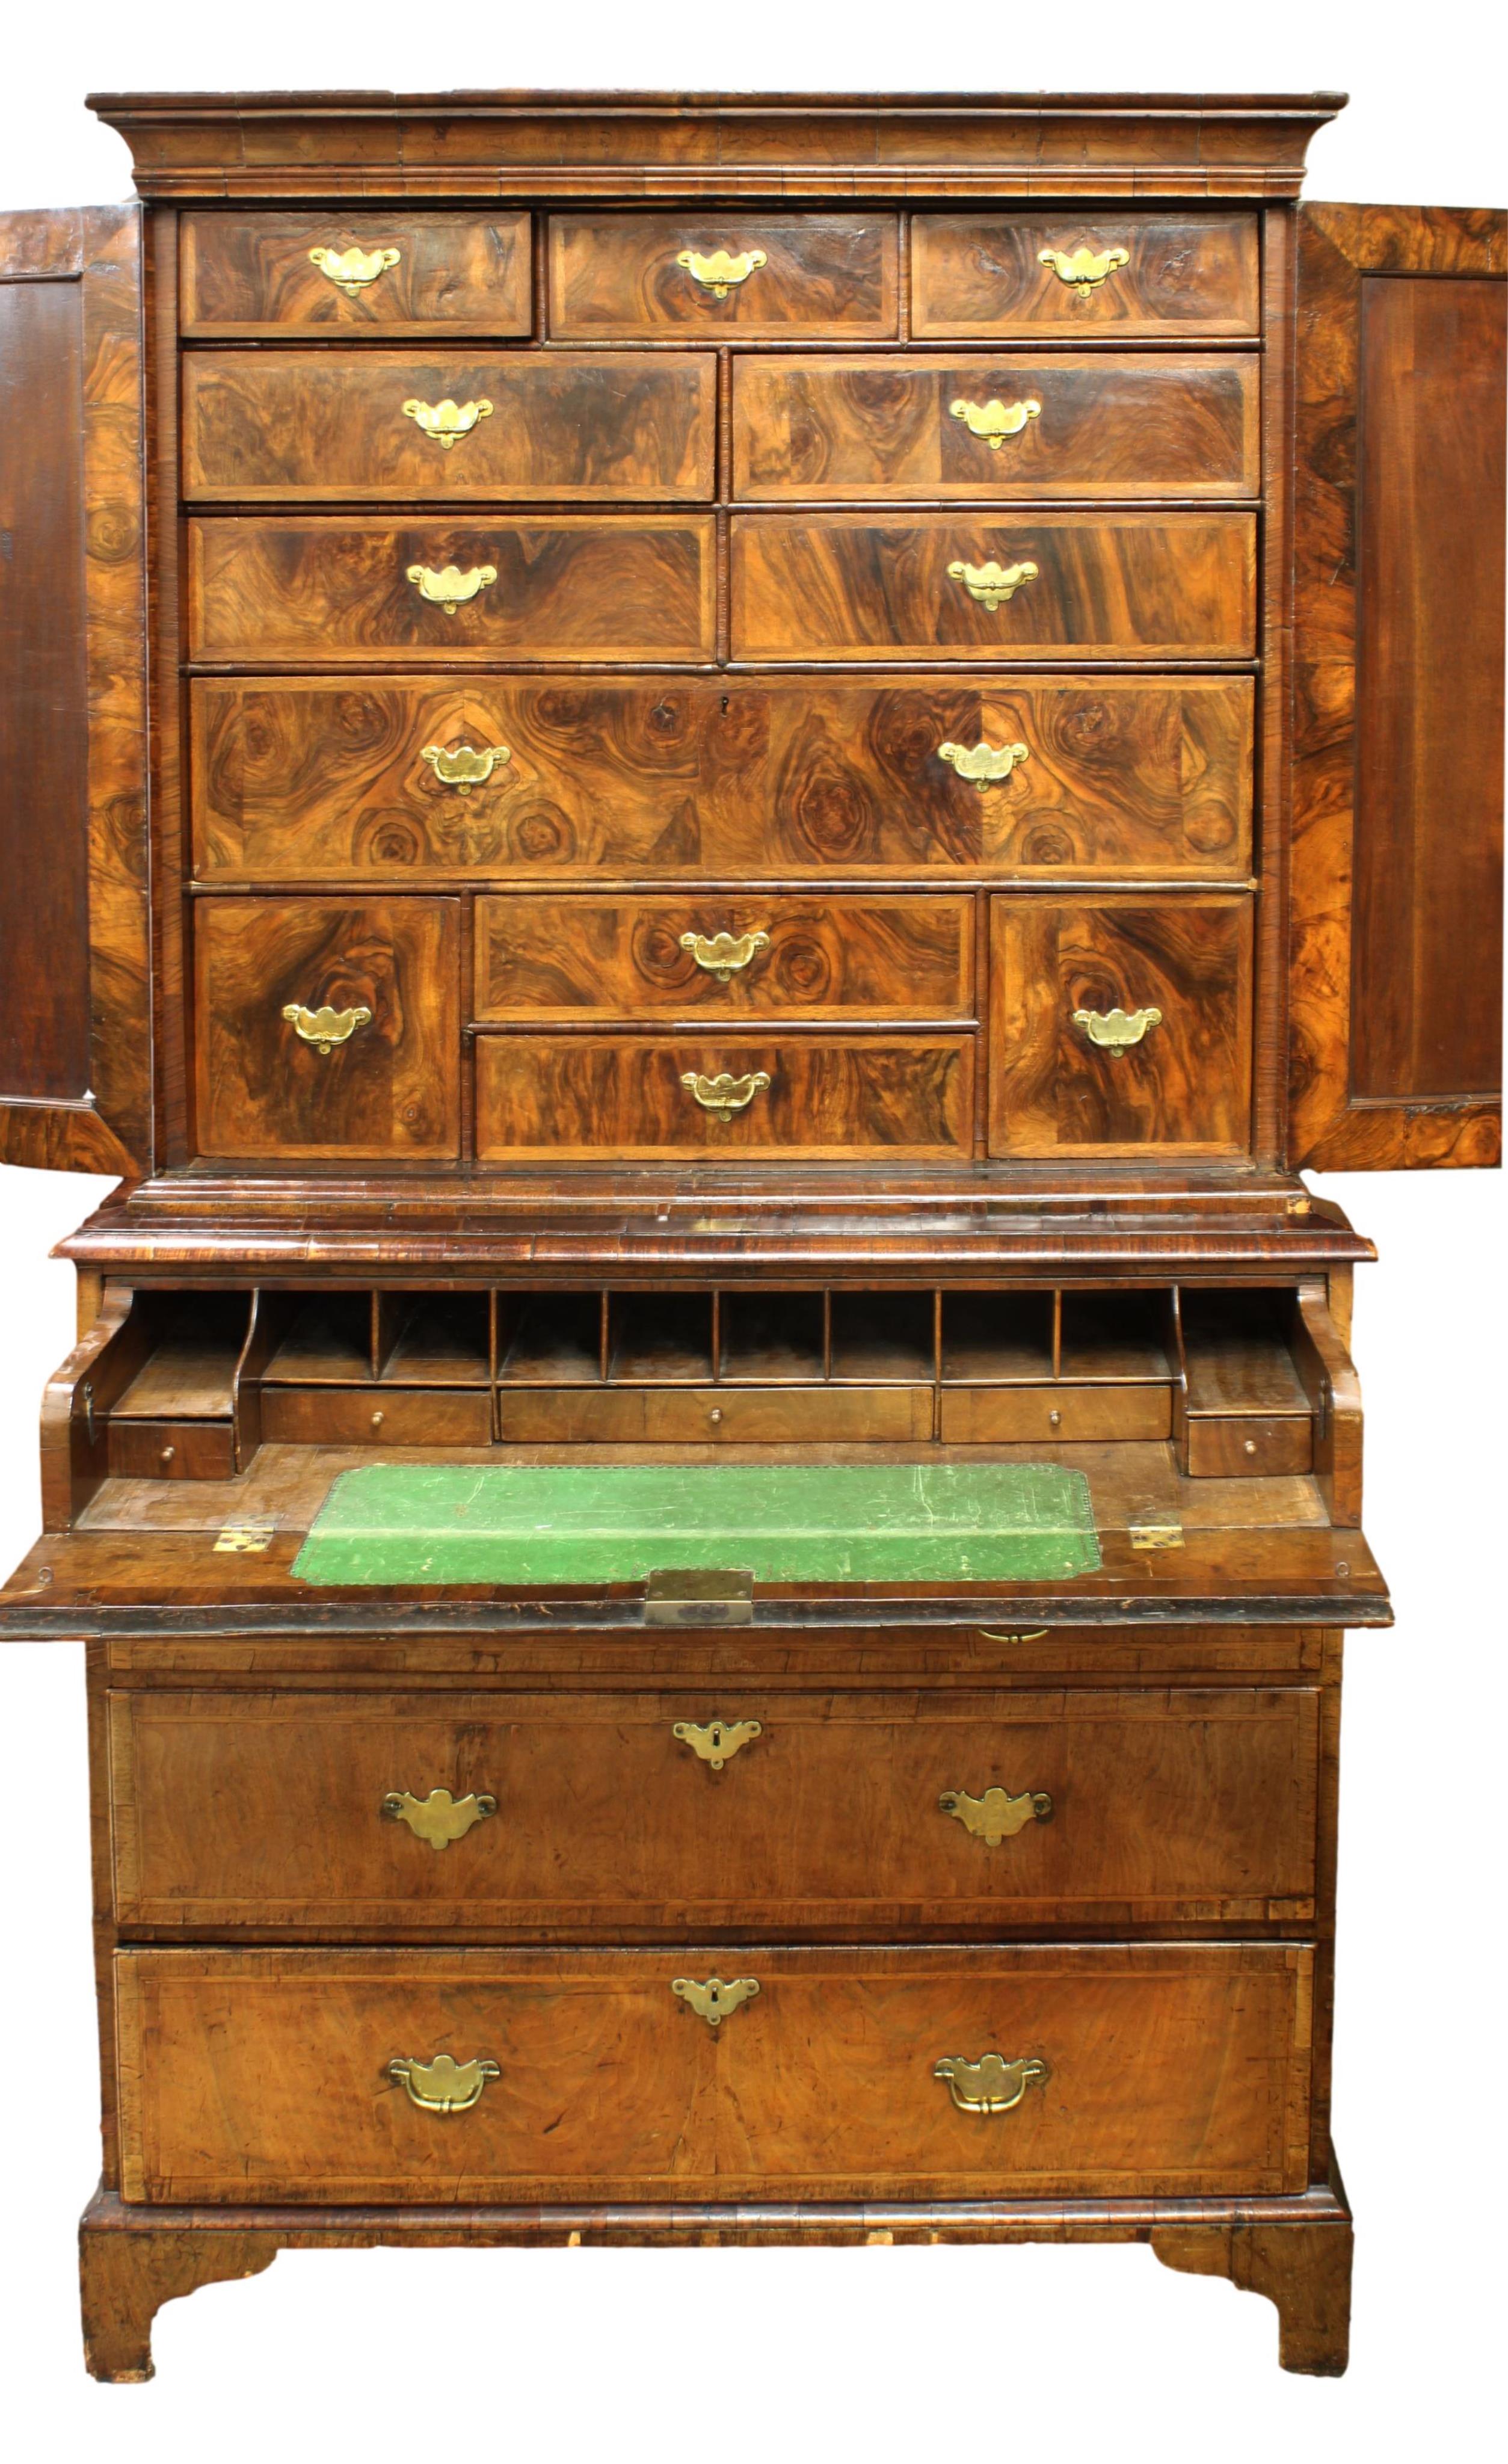 A fine George I walnut secretaire cabinet on chest, upper section with laburnum interior - Image 2 of 3